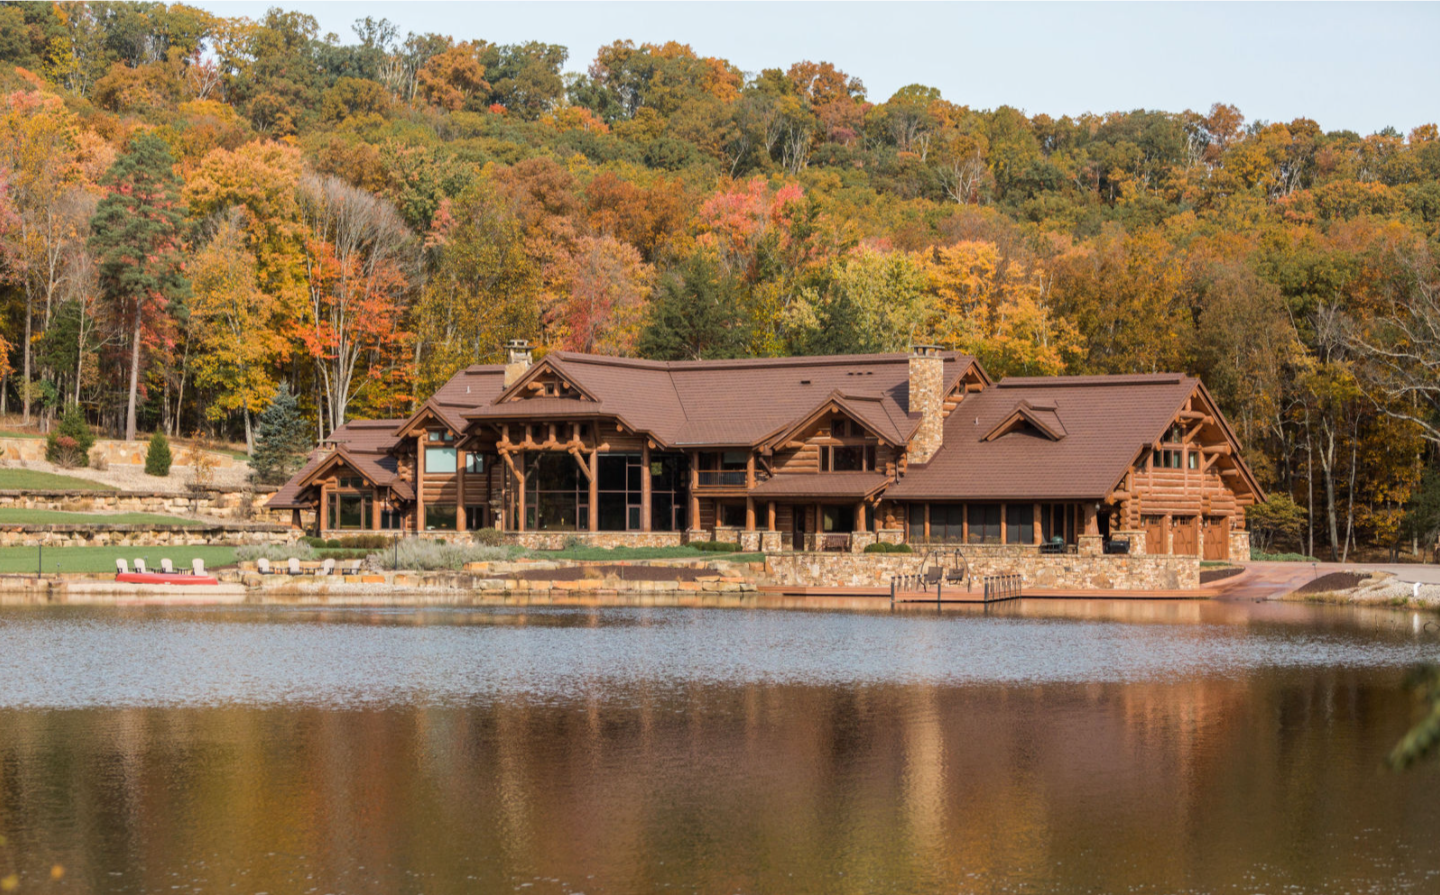 The 20,000-square-foot cabin.